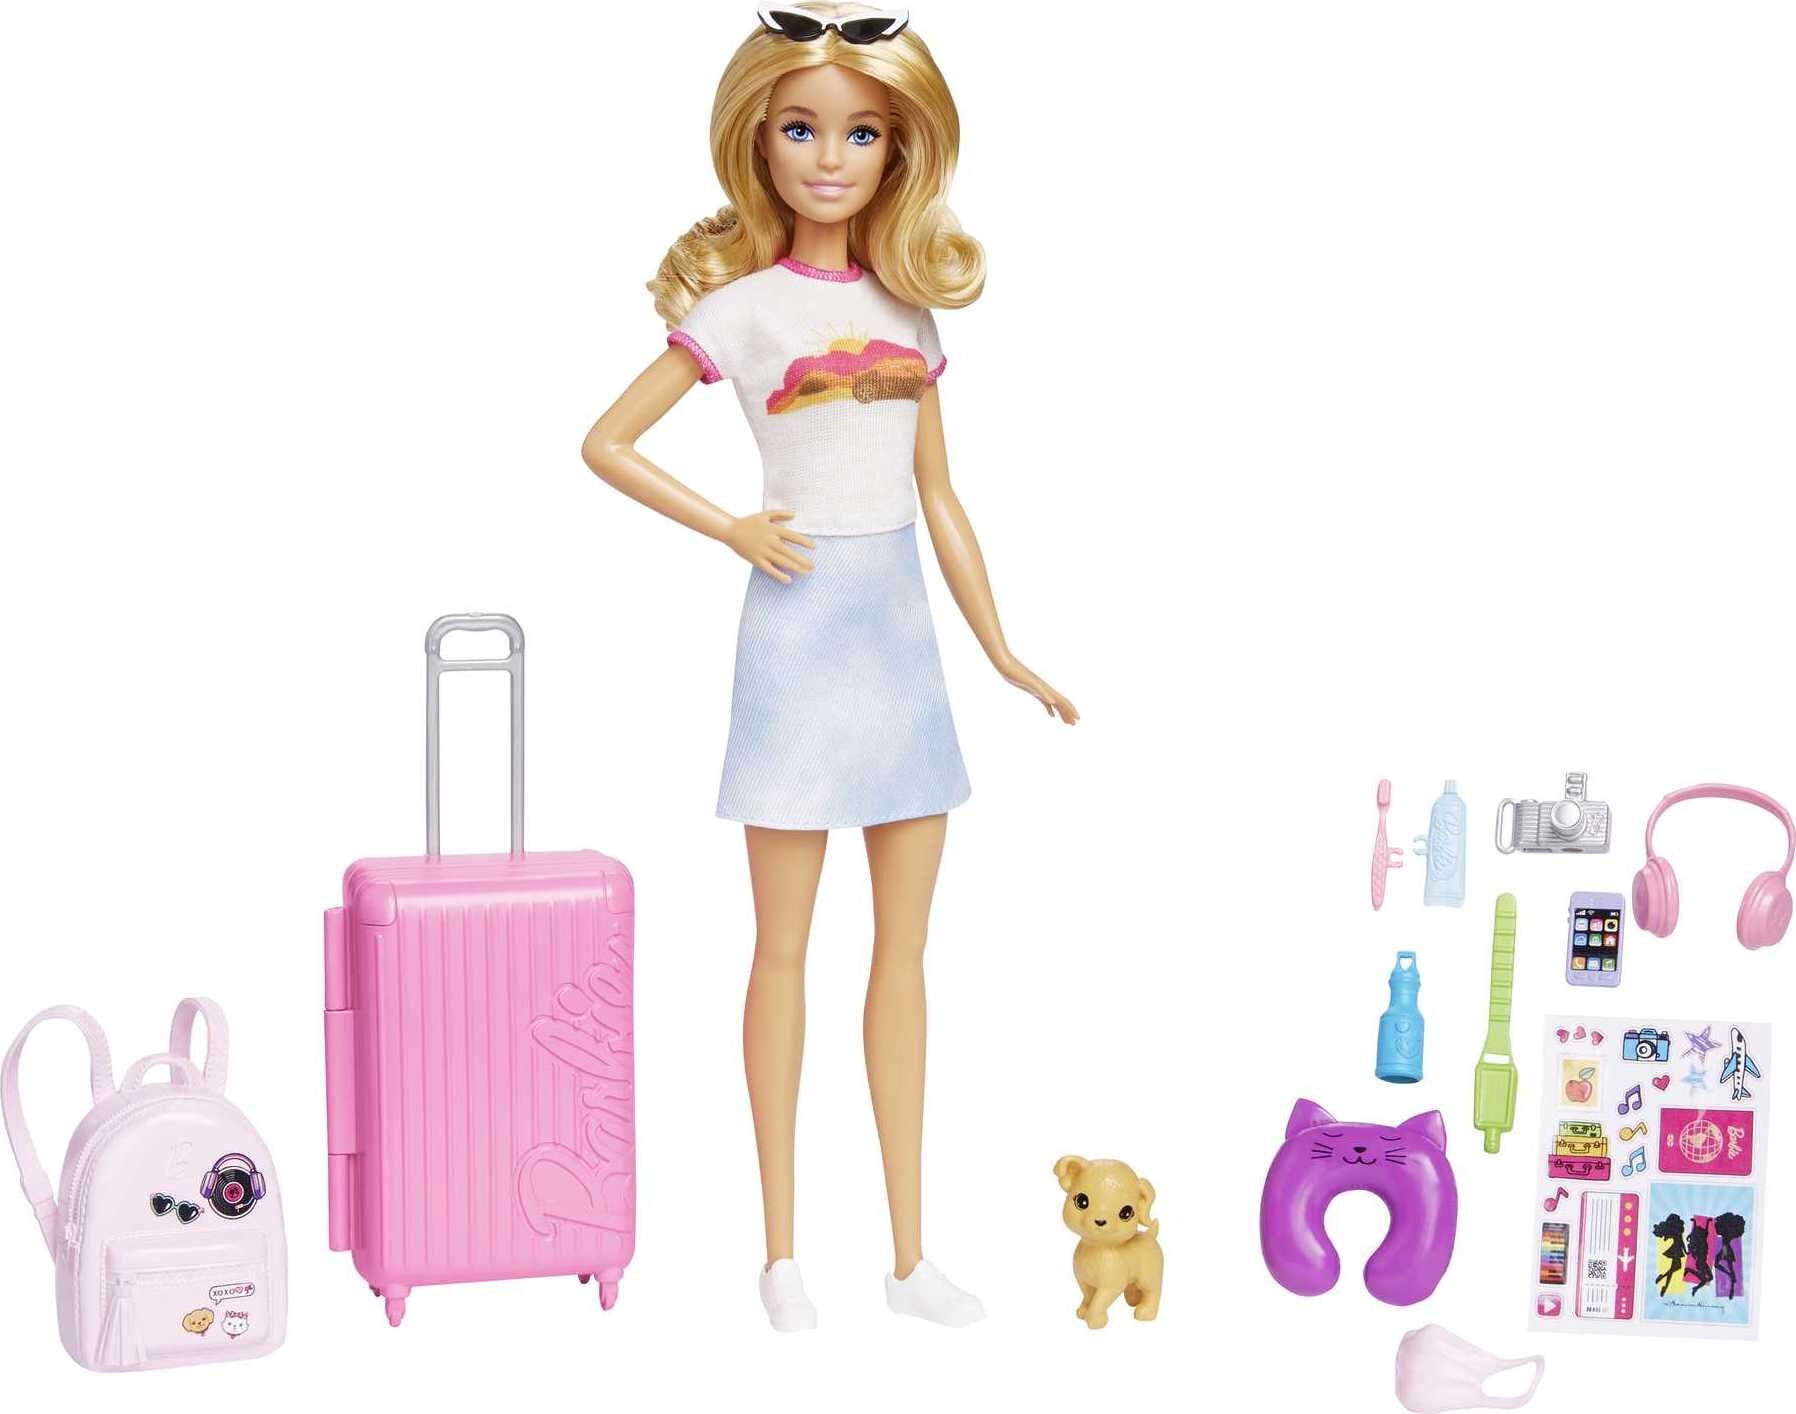 Barbie Travel Doll, Blonde, with Puppy, Opening Suitcase, Stickers and 10+ Accessories, for 3 to 7 Year Olds - wide 4